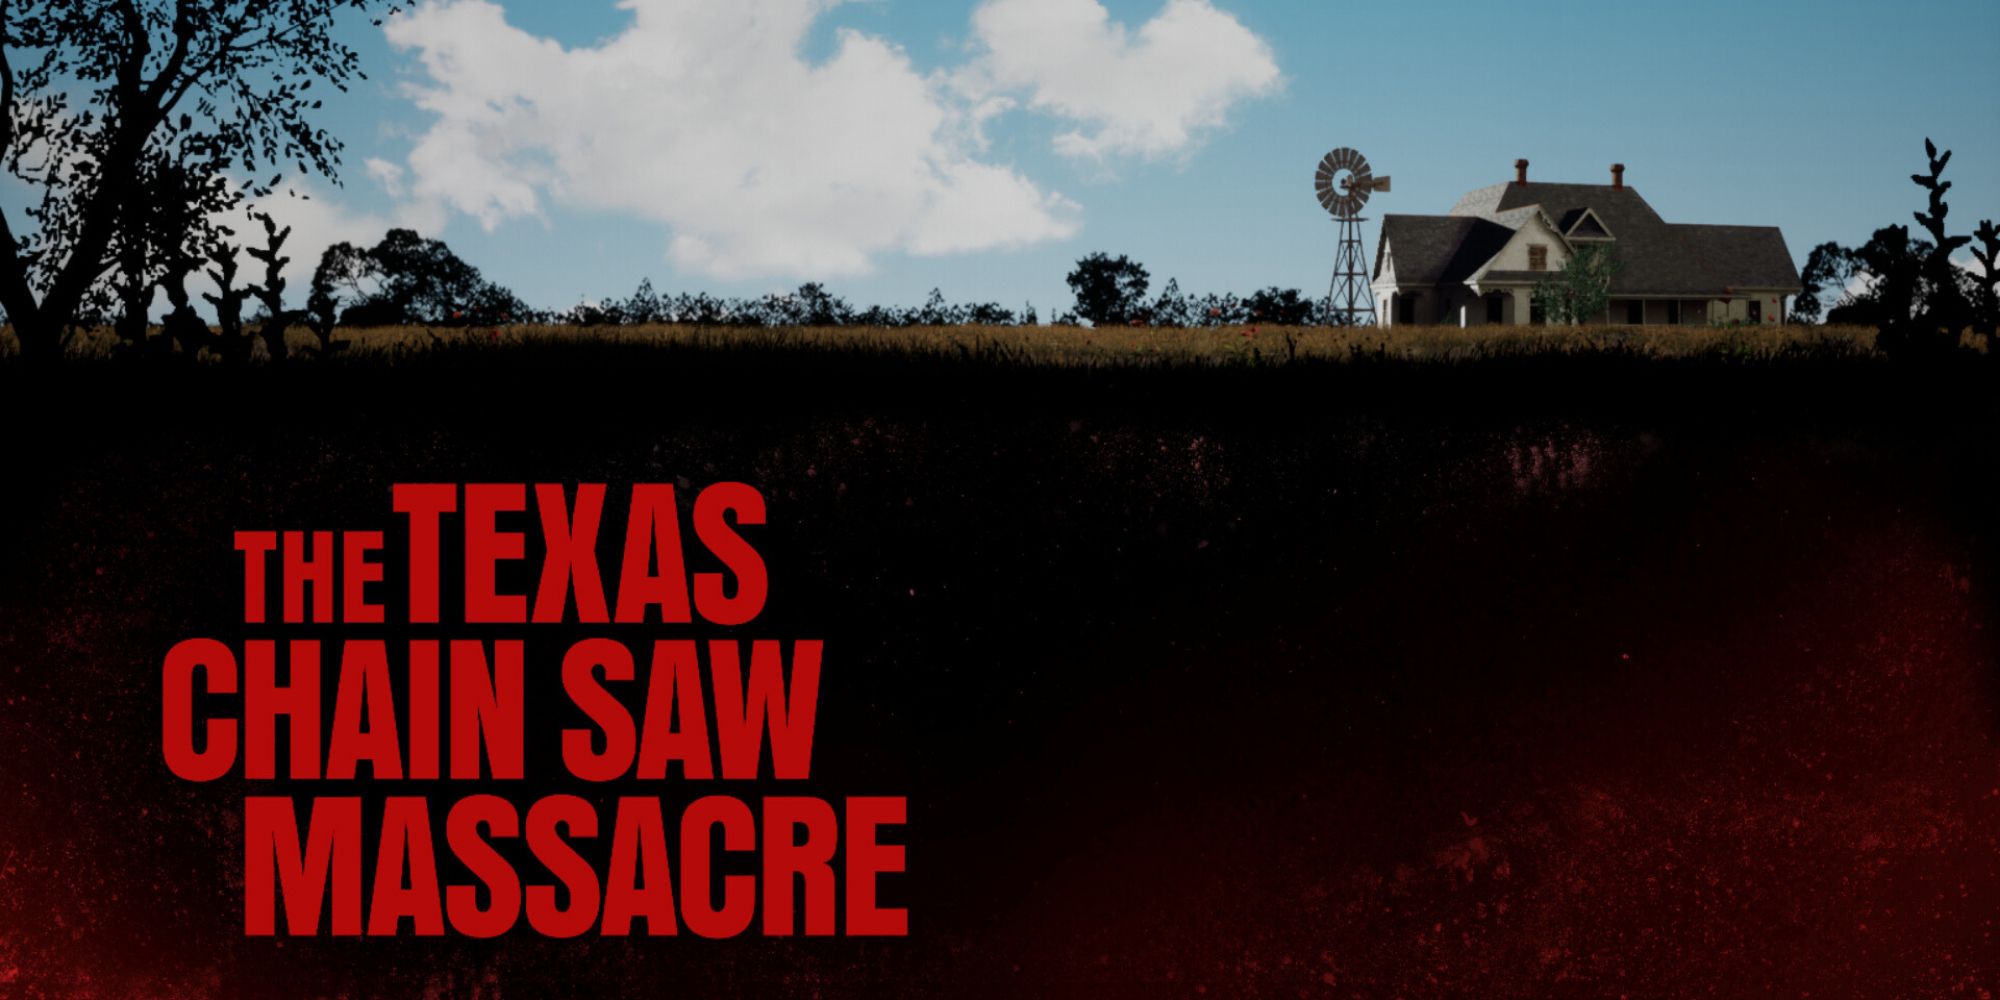 The title image from the main menu of Gun Interactive's The Texas Chainsaw Massacre